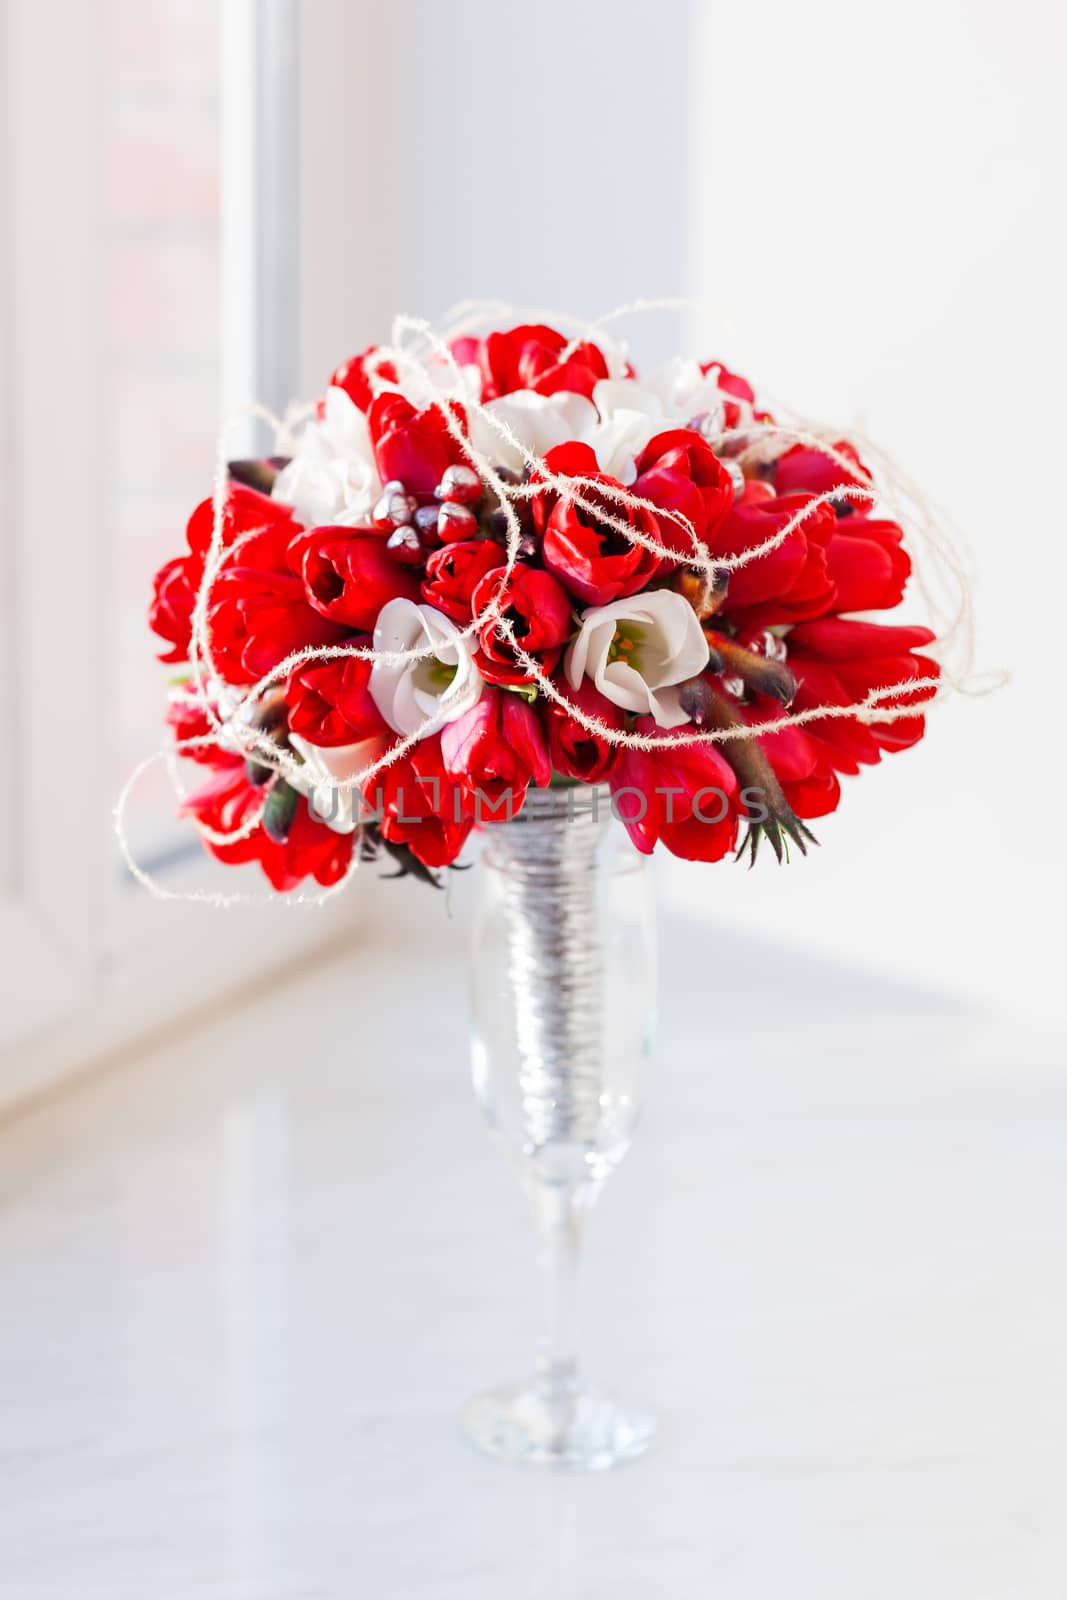 Bridal bouquet in glass vase on sunlight. Traditional floral composition with bright red tulips on window sill.